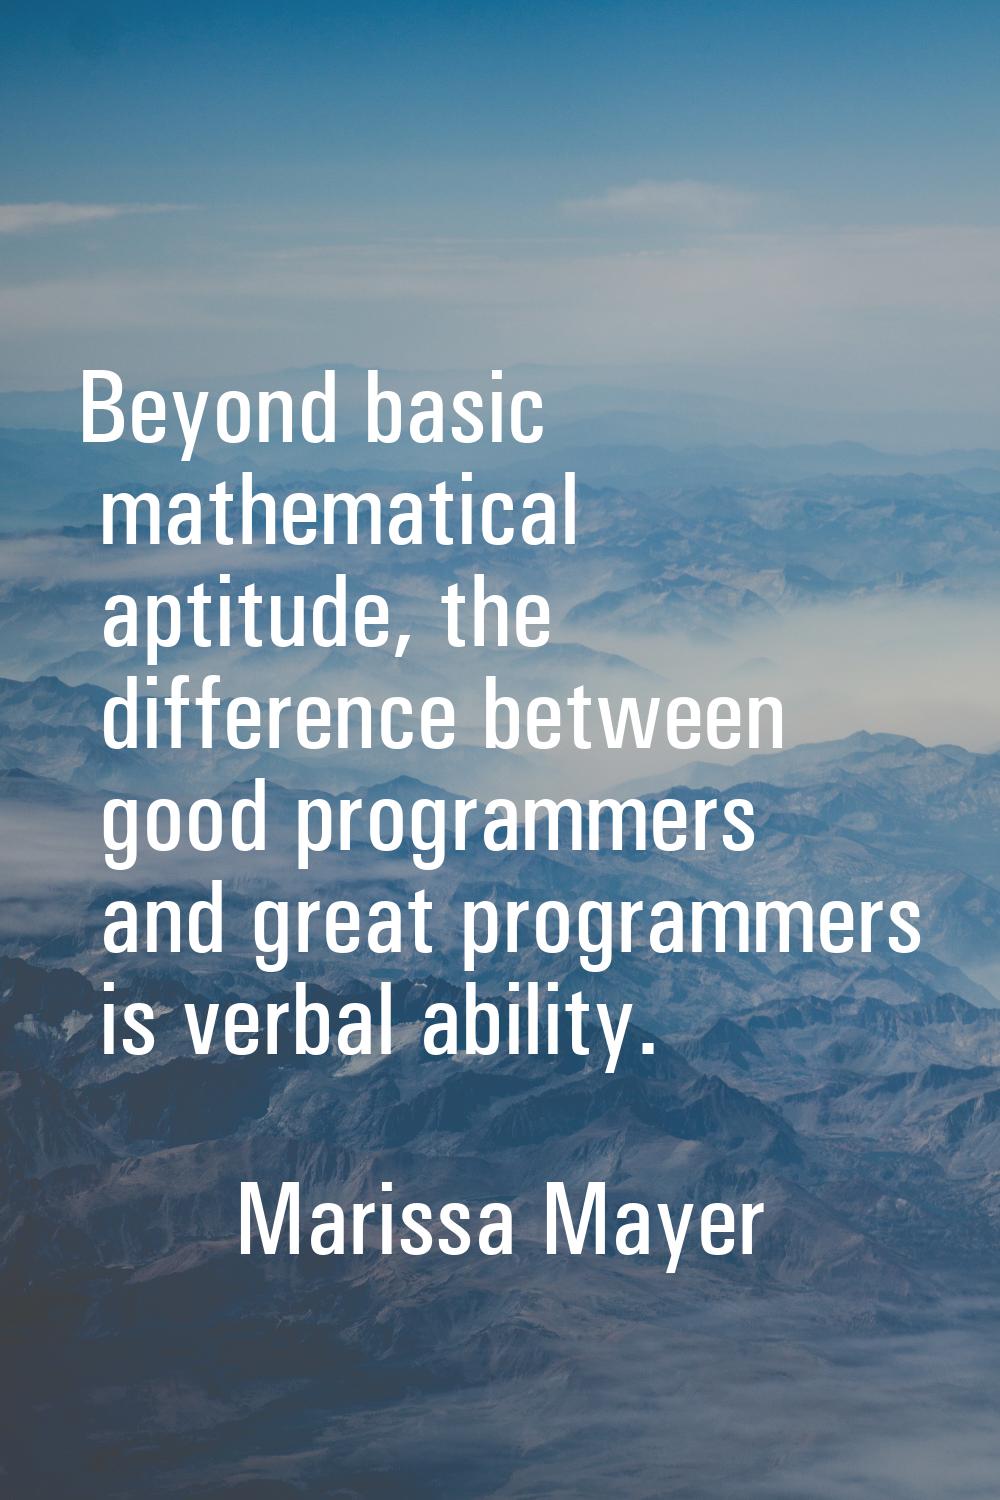 Beyond basic mathematical aptitude, the difference between good programmers and great programmers i